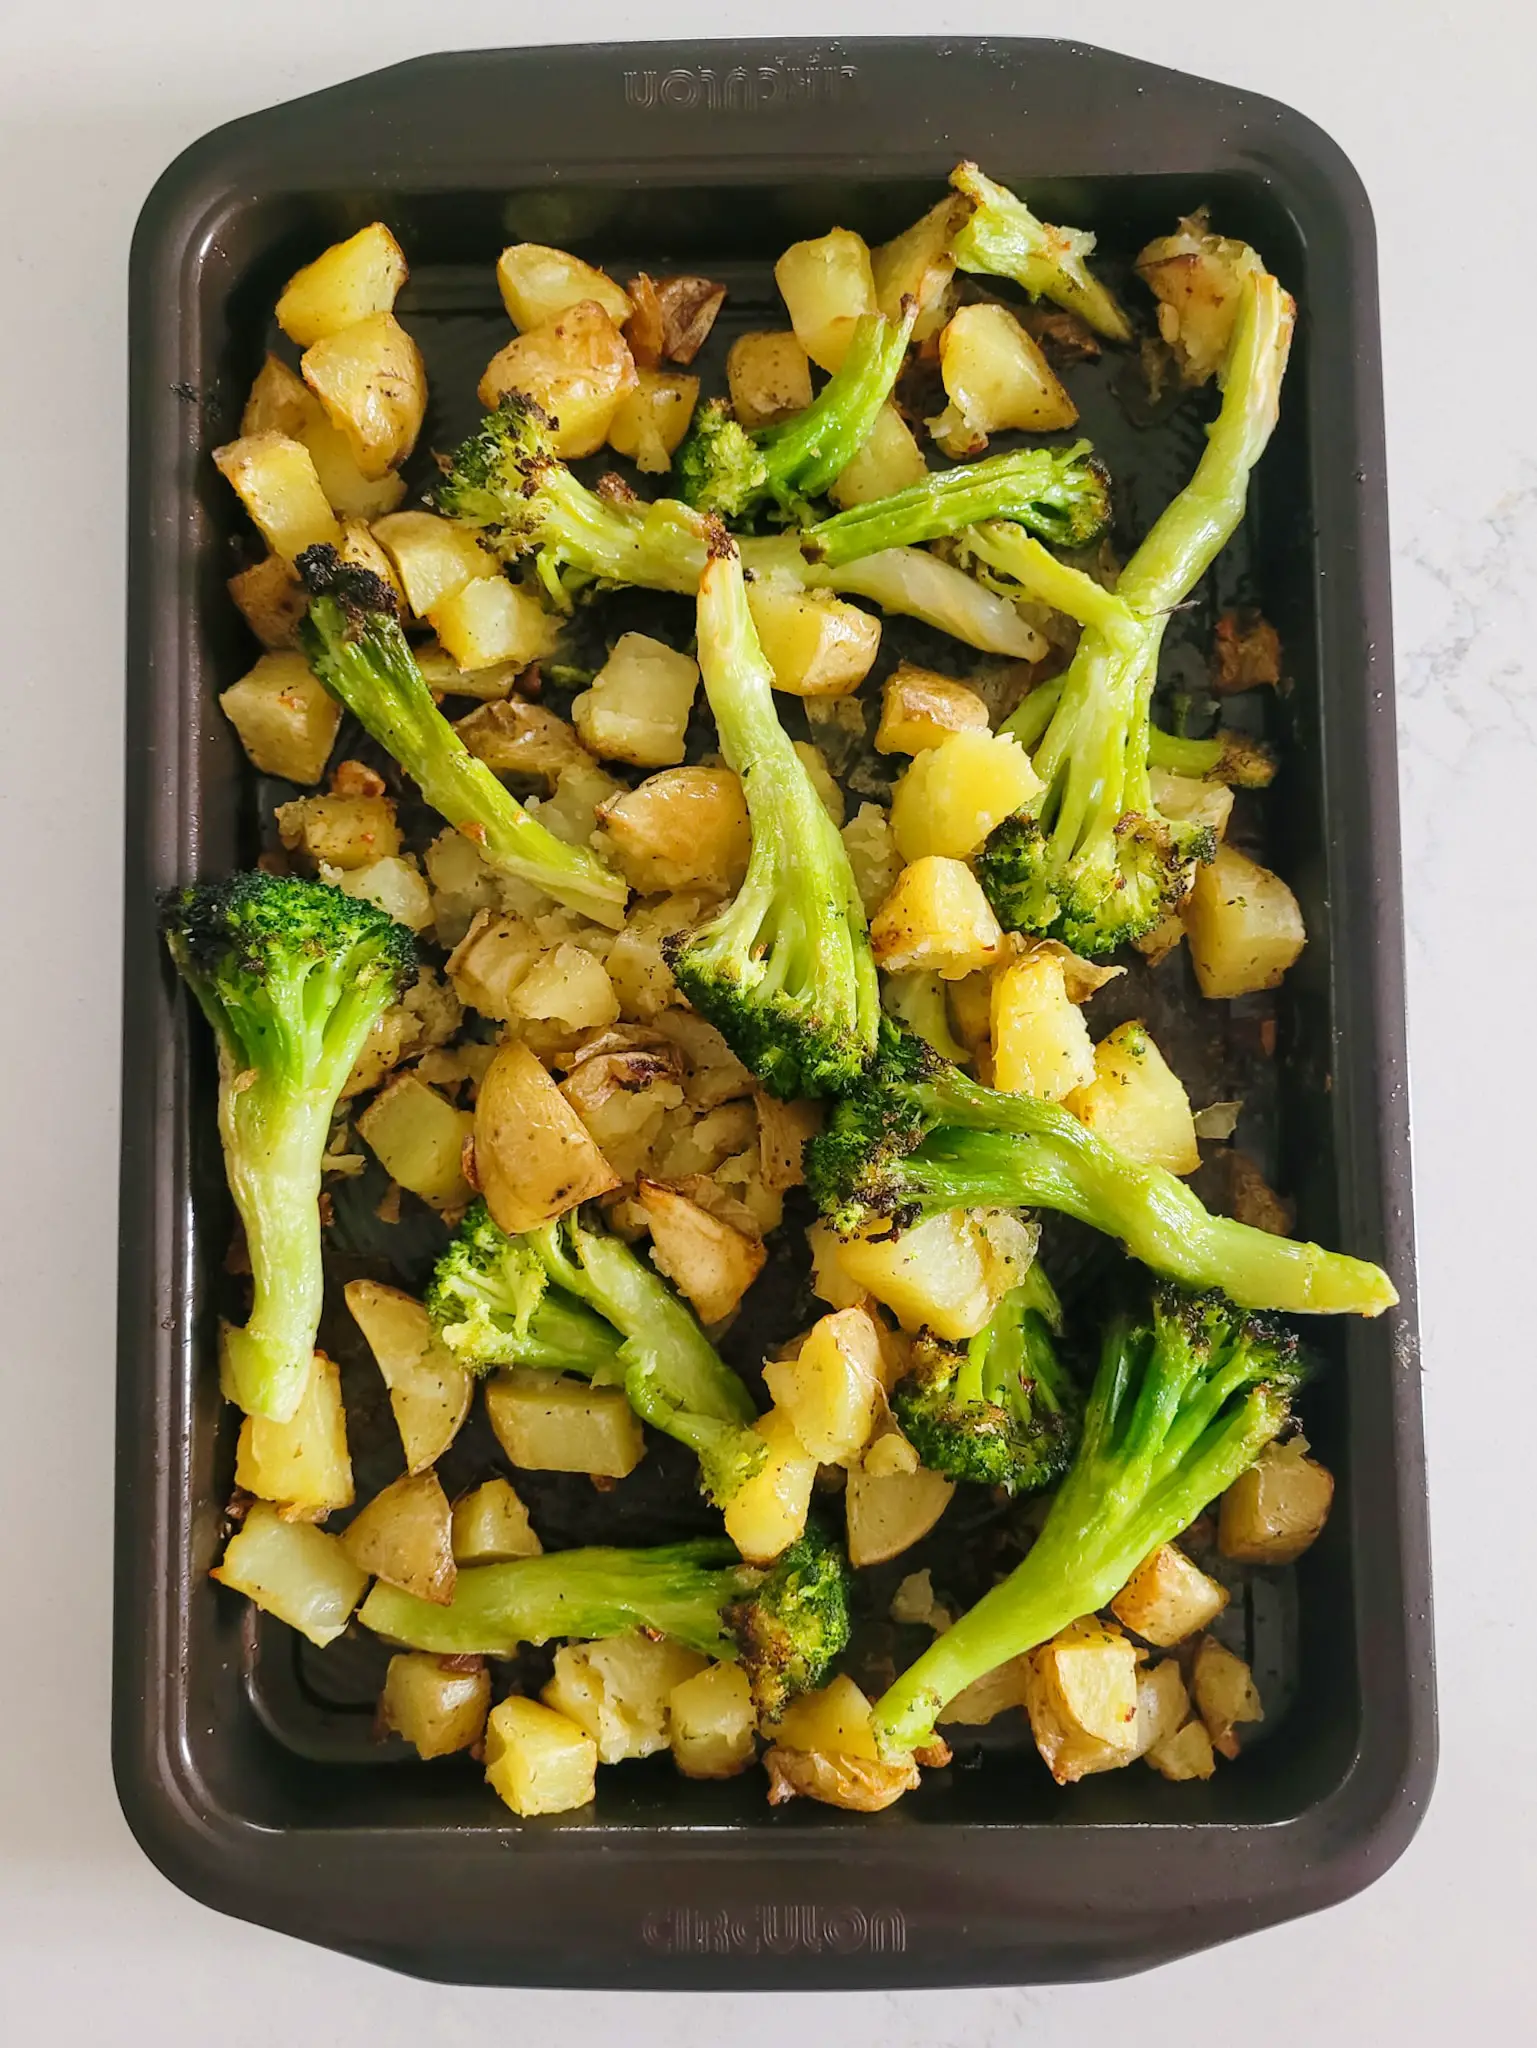 Easy Potatoes and Broccoli Roasted in the Oven